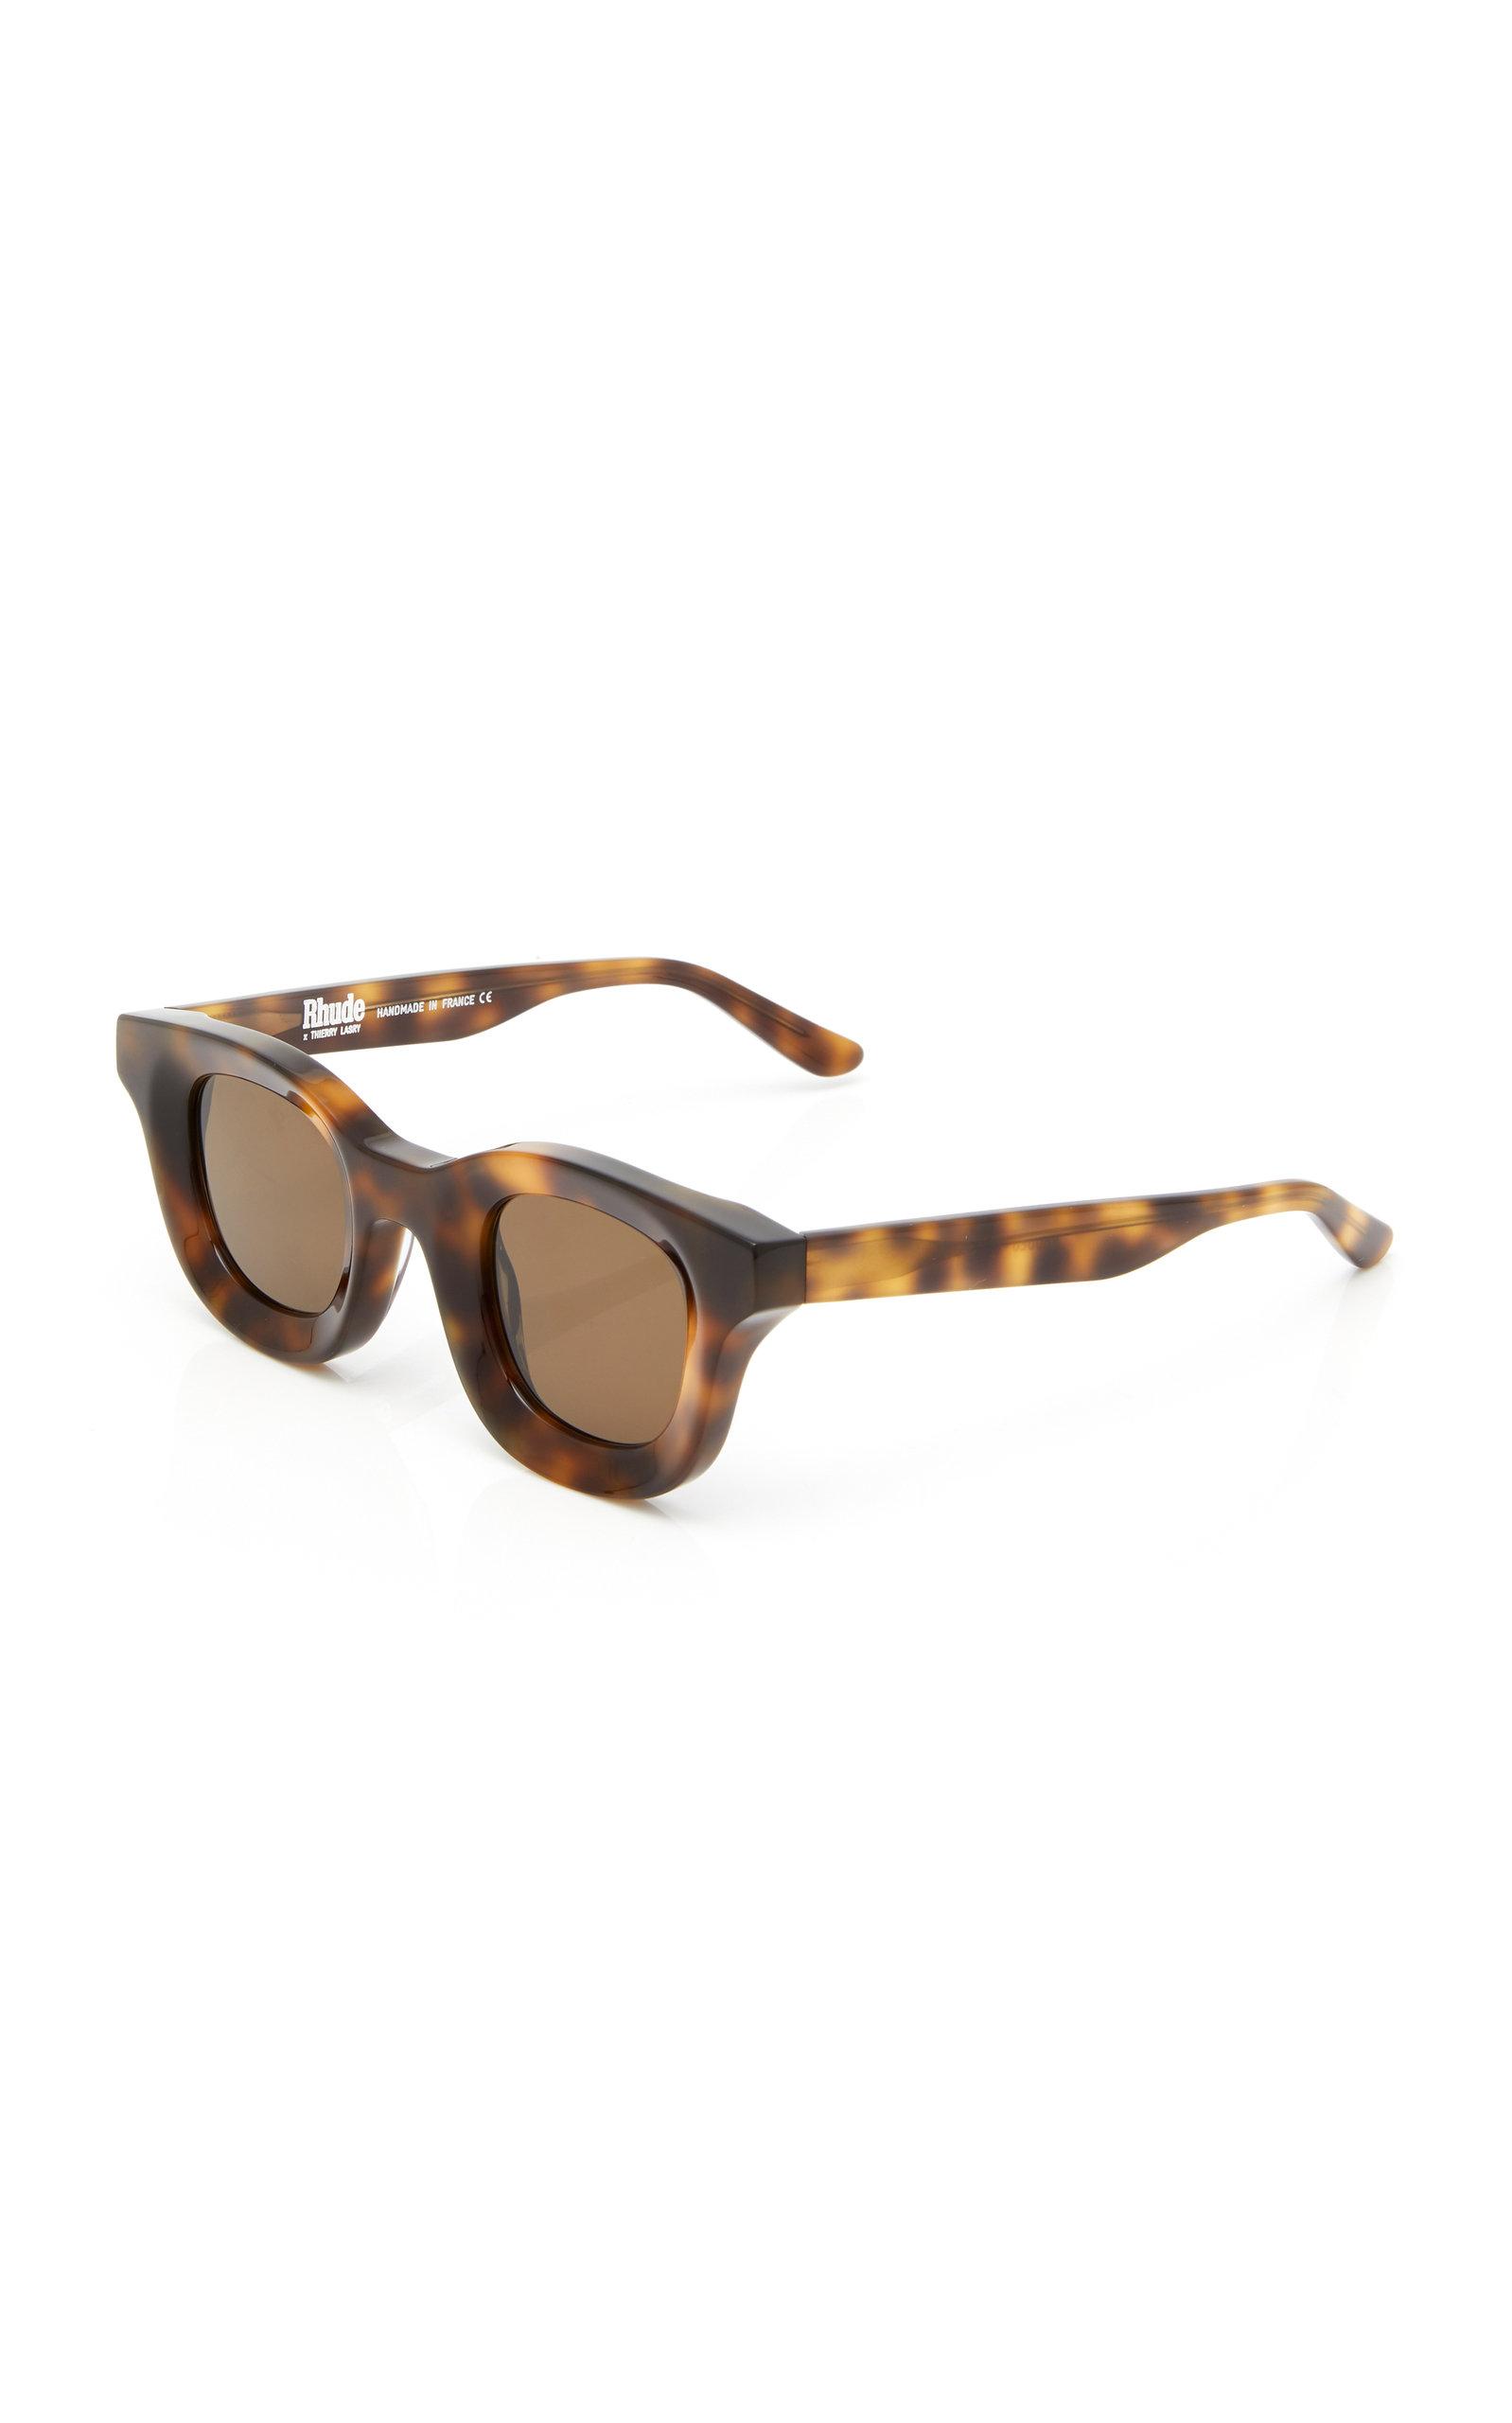 Thierry Lasry Rhude X Rhodeo Acetate Square-frame Sunglasses in Brown ...